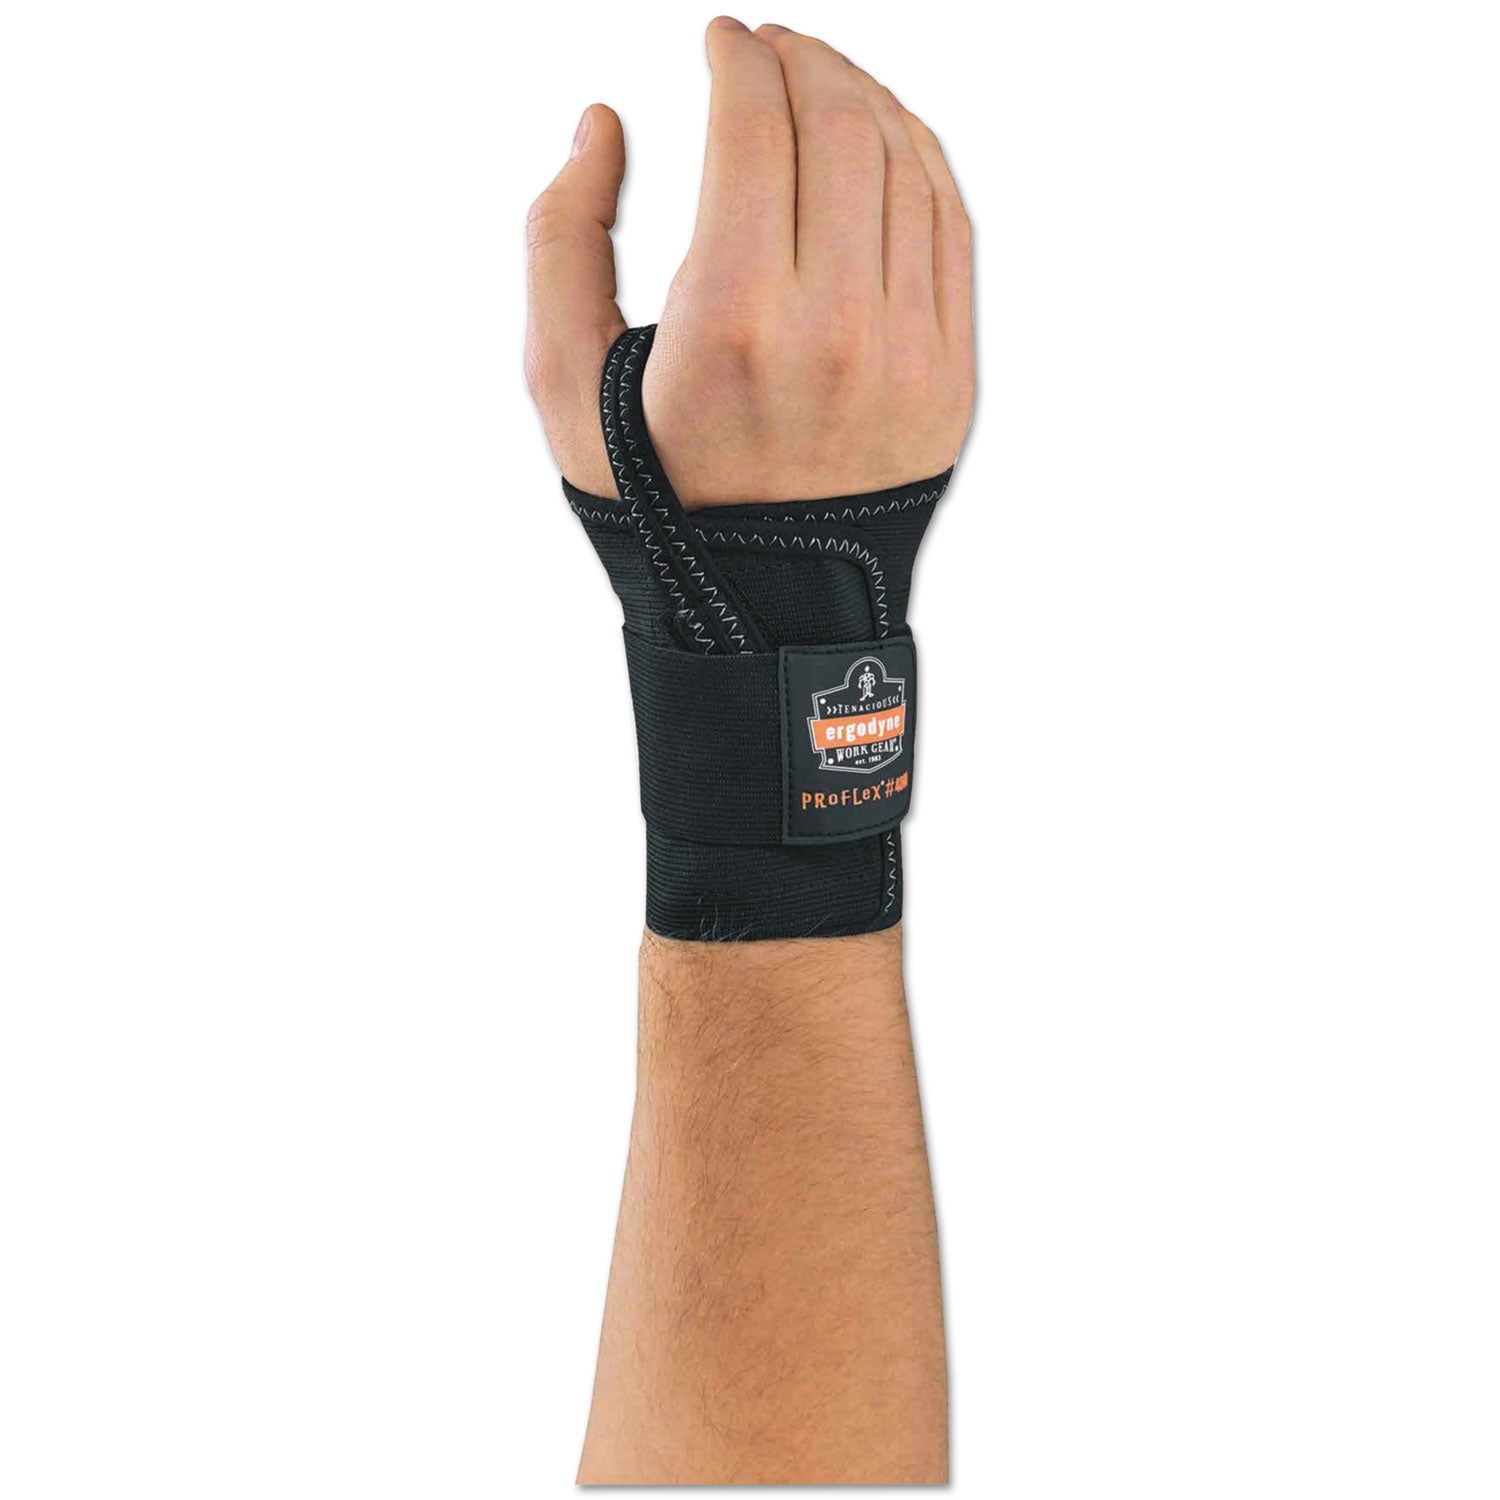 ProFlex 4000 Wrist Support, Large (7-8"), Fits Left-Hand, Black, Ships in 1-3 Business Days - 